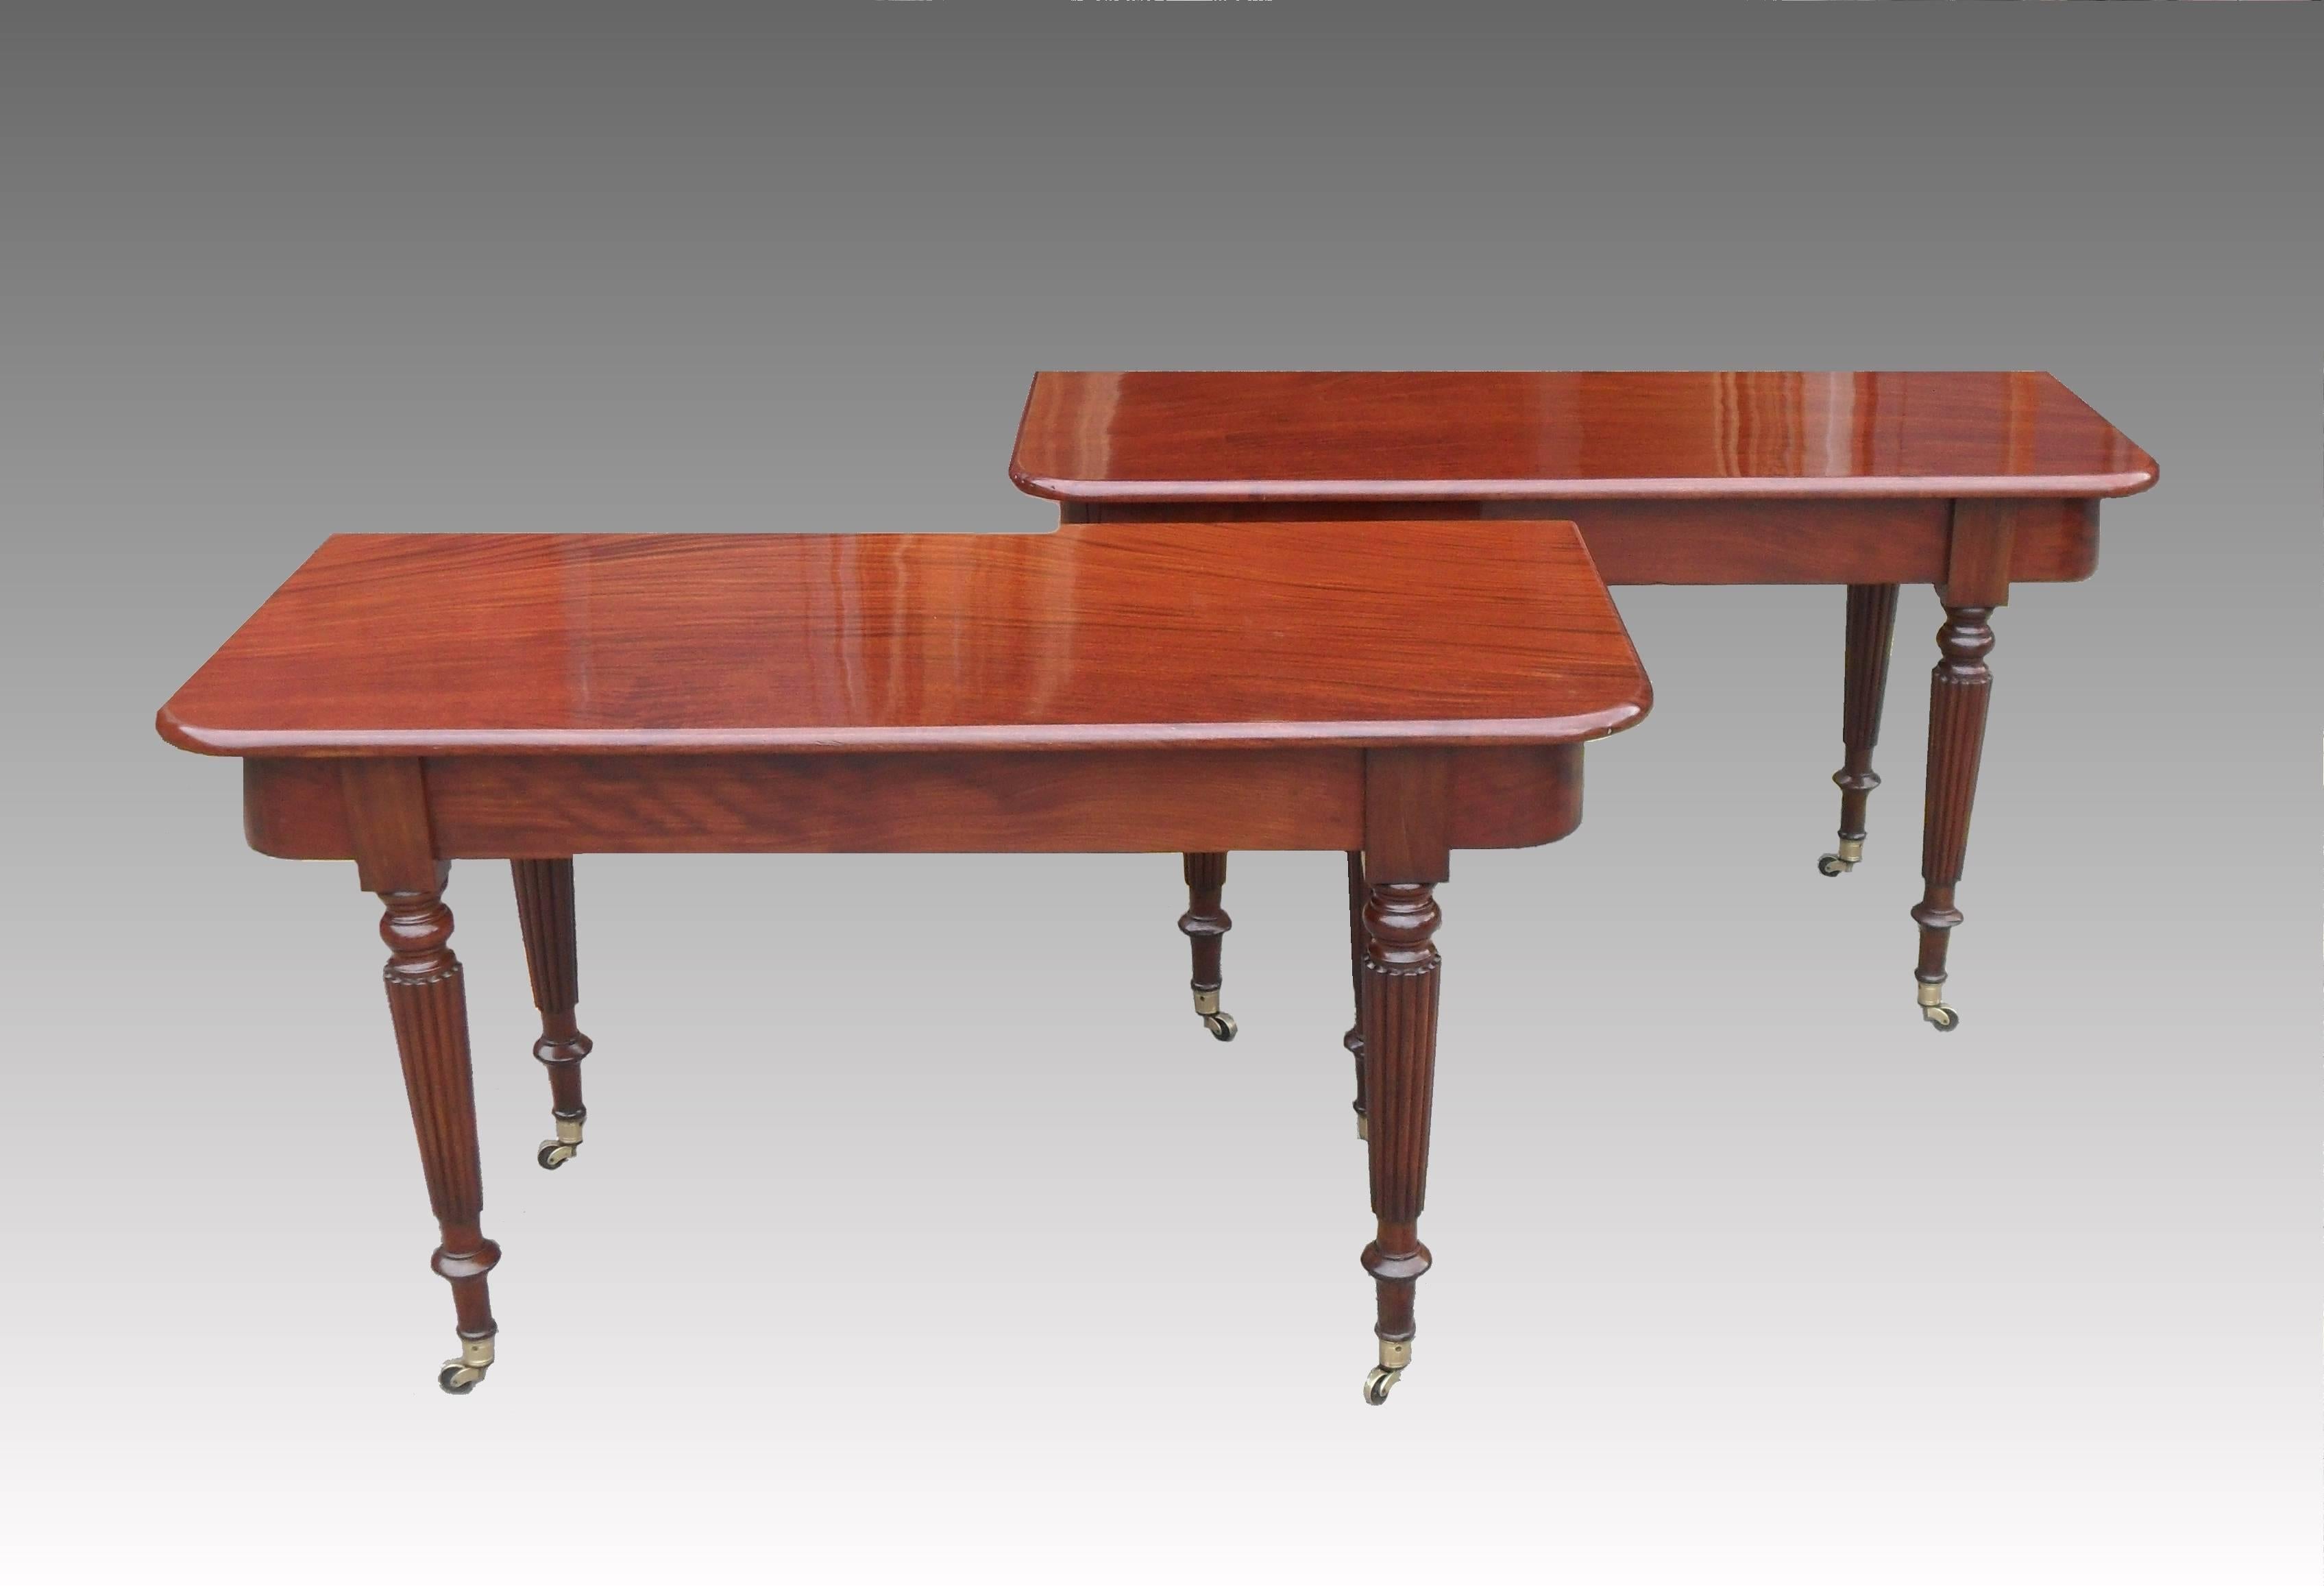 19th Century English George iv Figured Mahogany Extending Dining Table Attributed to Gillows For Sale